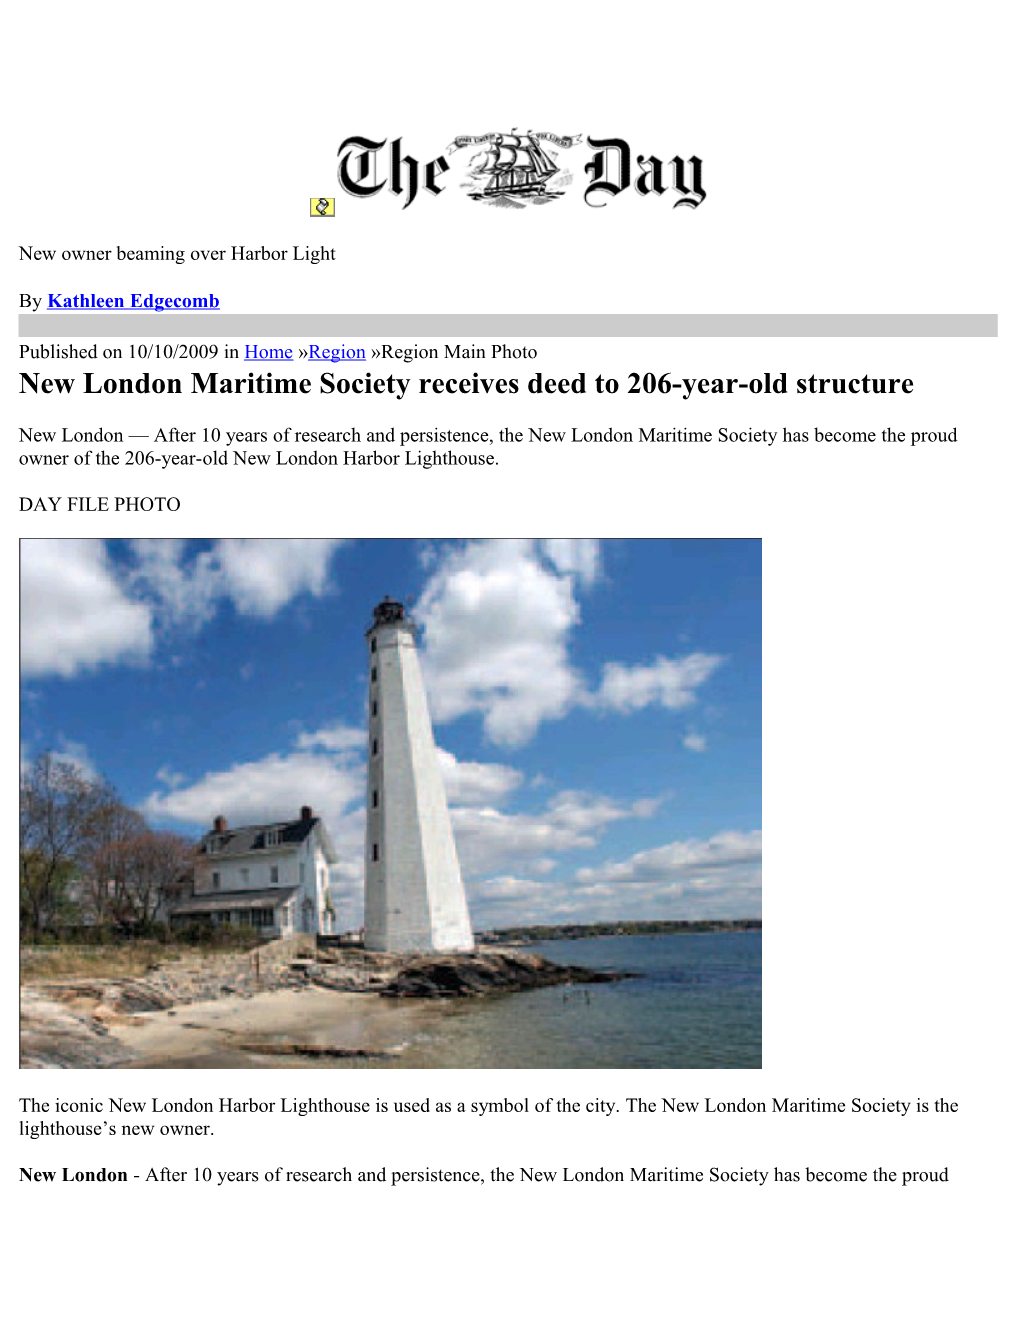 New London Maritime Society Receives Deed to 206-Year-Old Structure